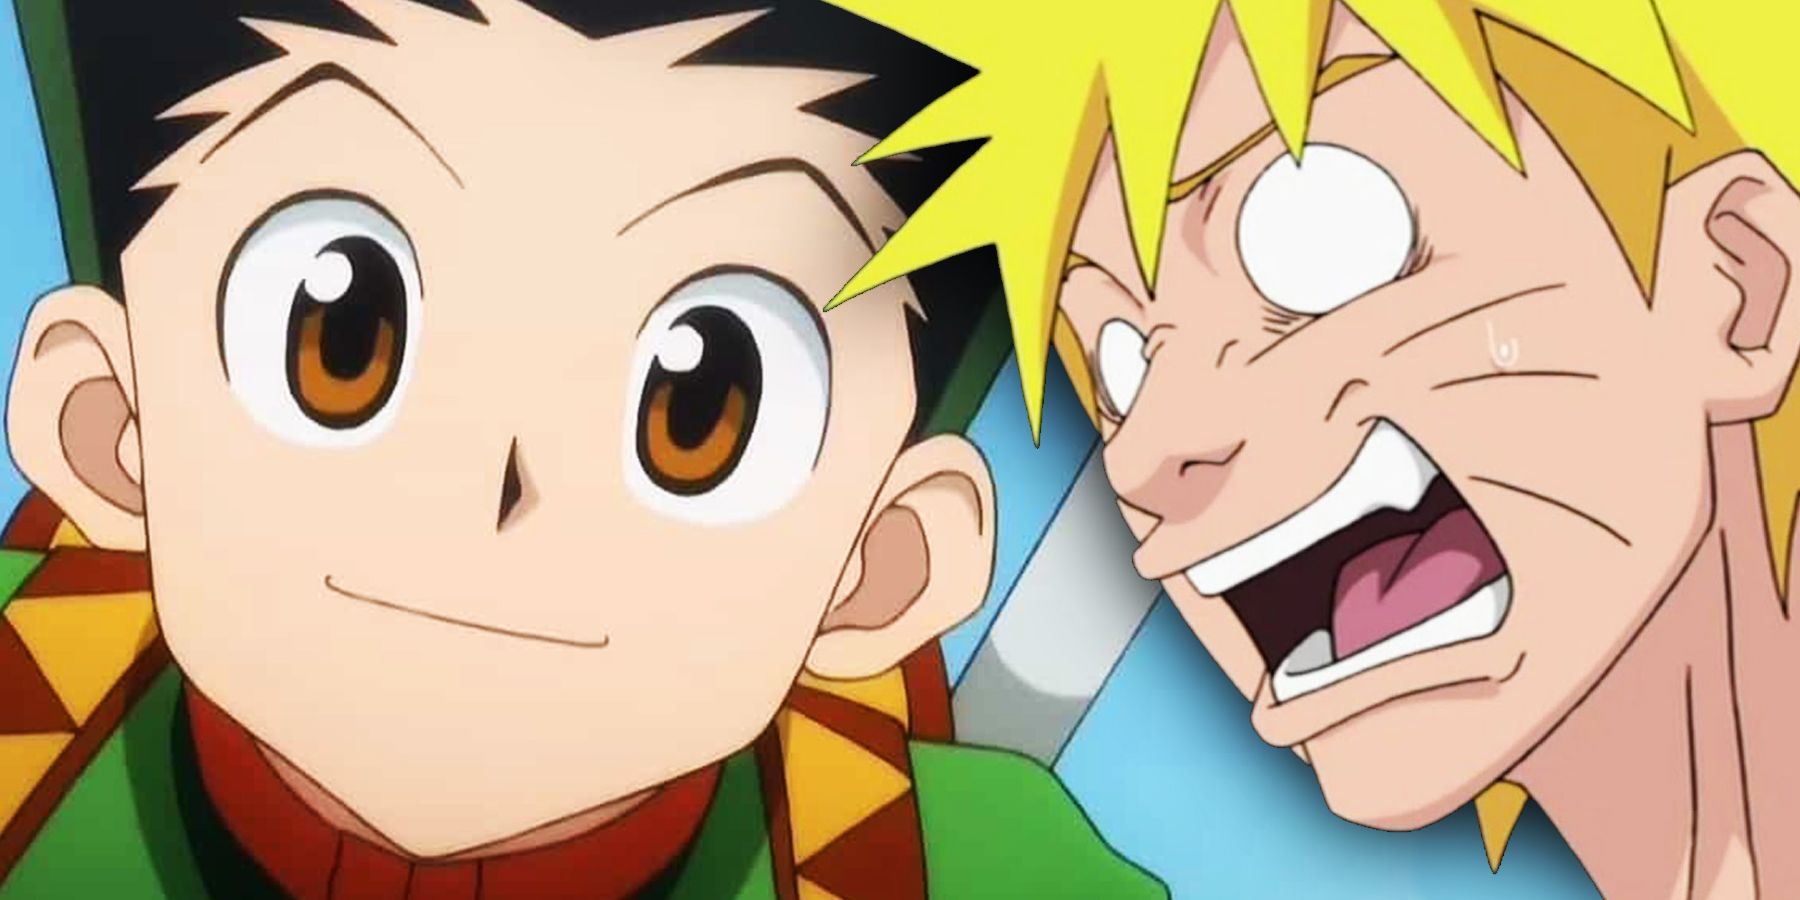 Gon from anime Hunter X Hunter and Naruto from anime Naruto